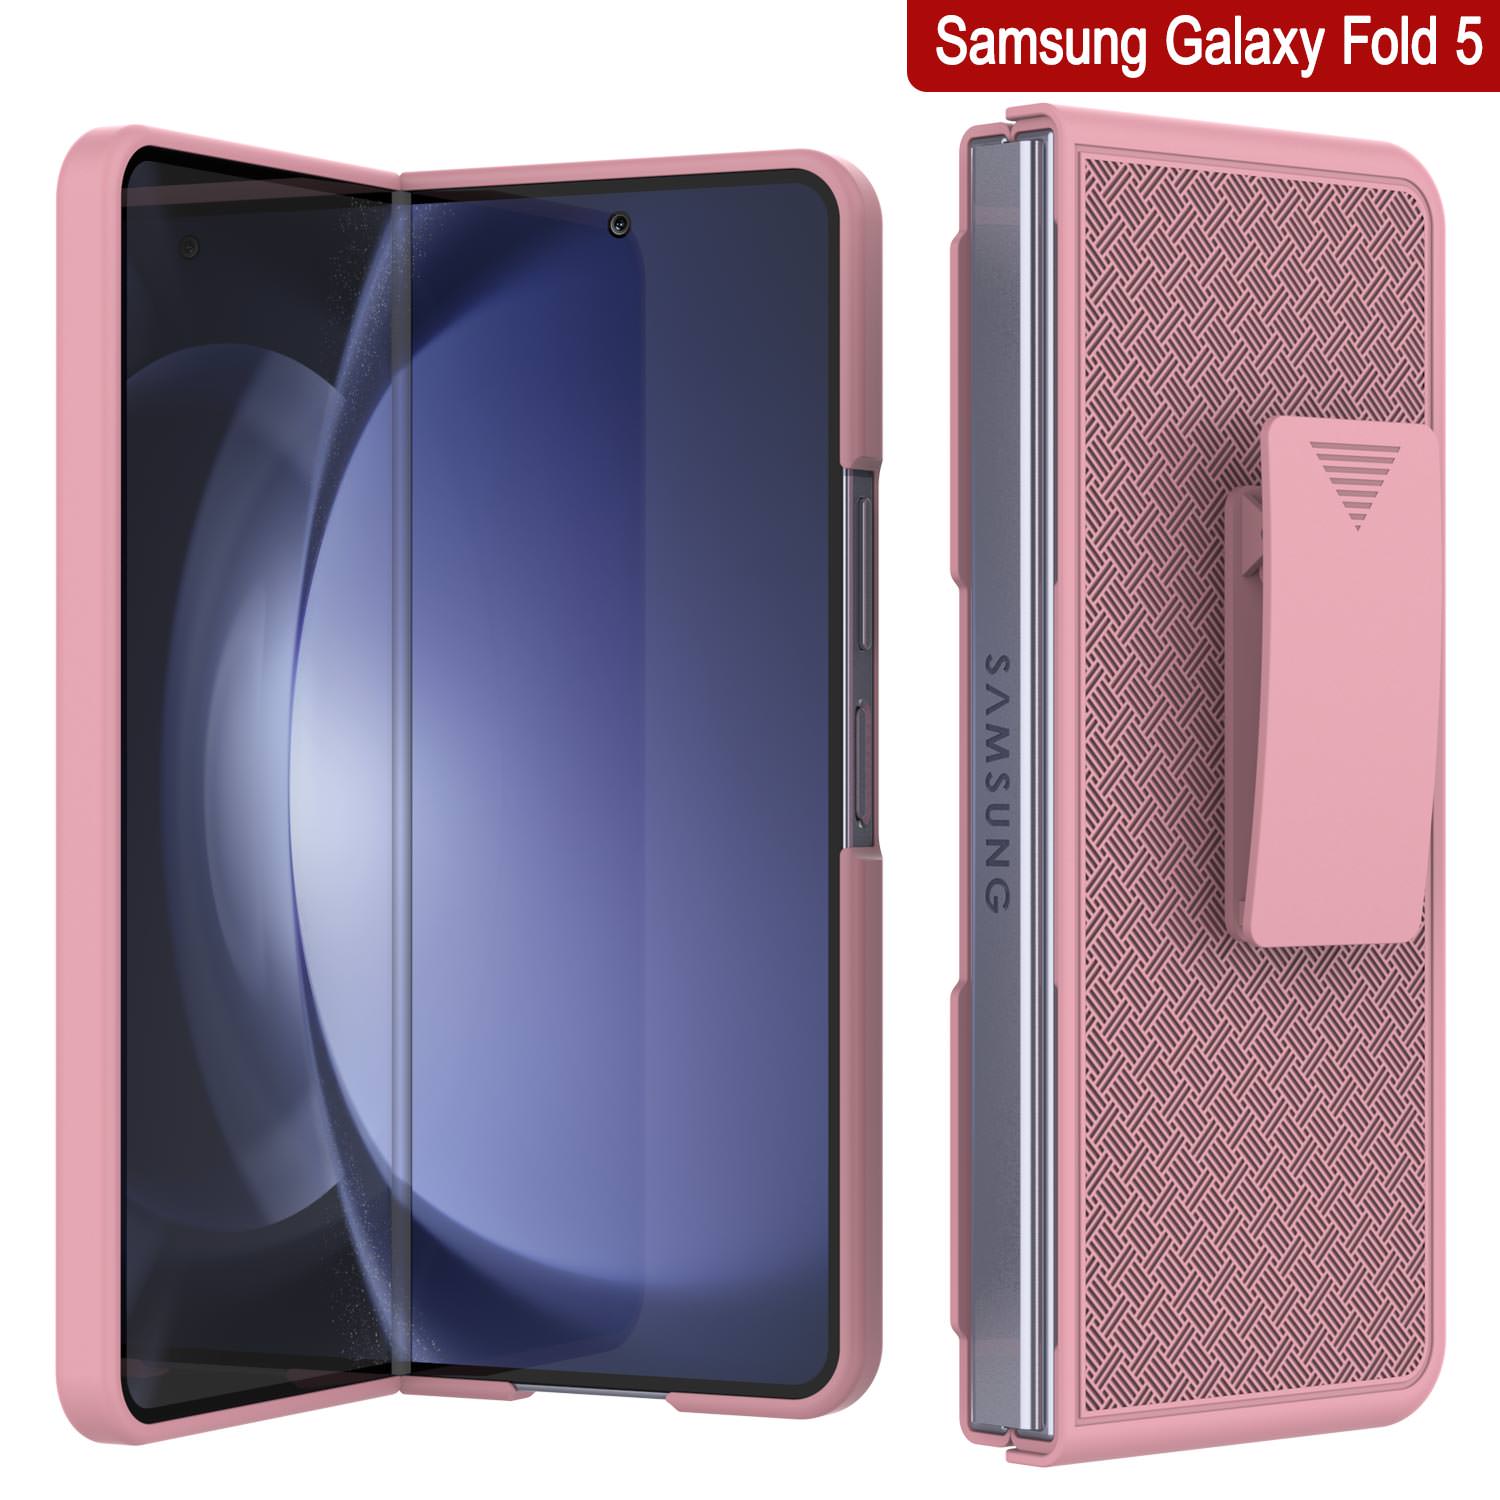 Galaxy Z Fold5 Case With Tempered Glass Screen Protector, Holster Belt Clip & Built-In Kickstand [Pink]